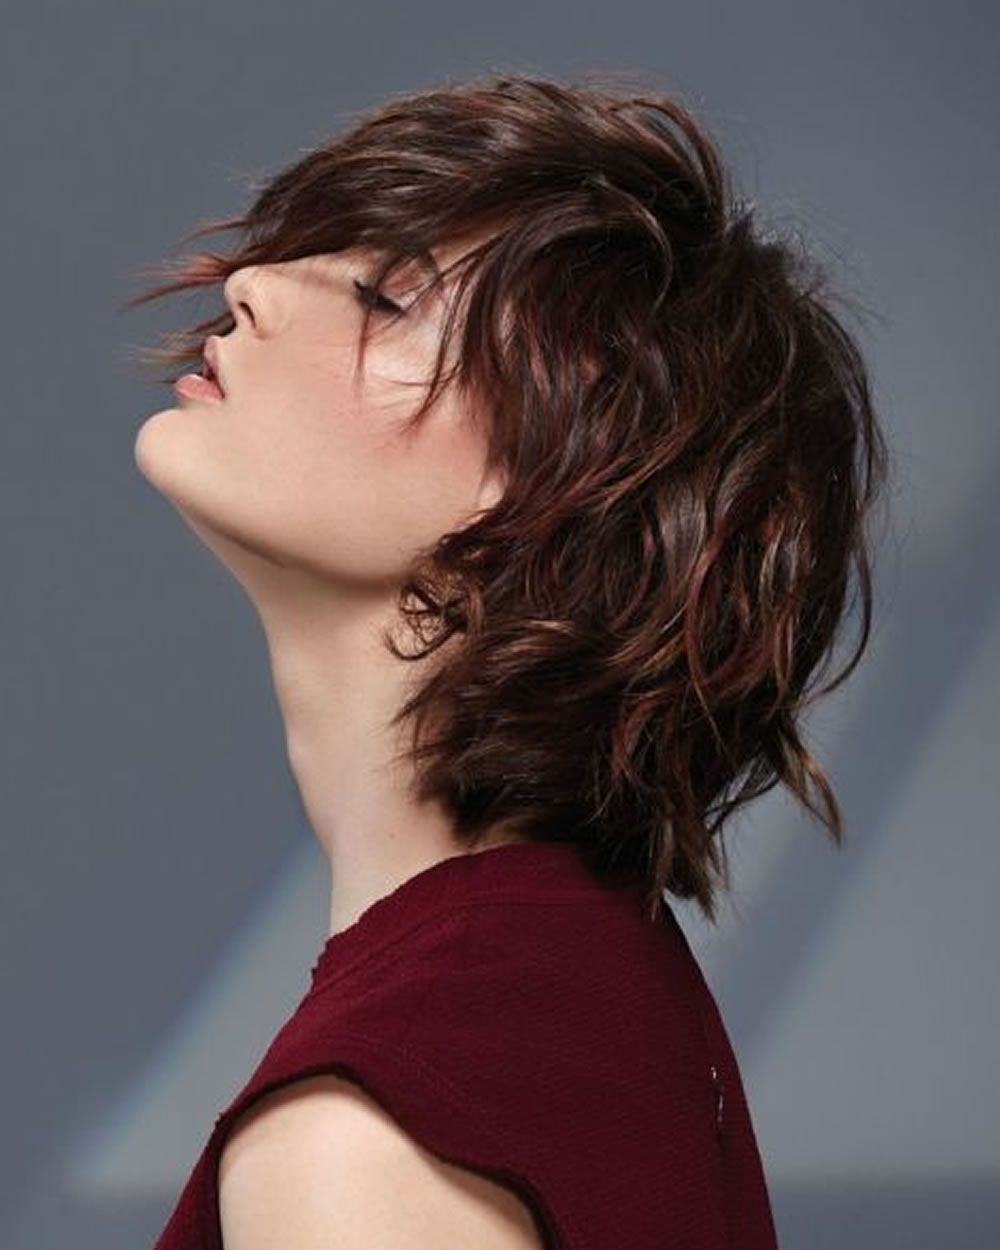 Hair Cuts : Bob Haircuts For Round Faces And Fine Hair Thick Female With Short Haircuts For Round Faces Women (View 10 of 25)